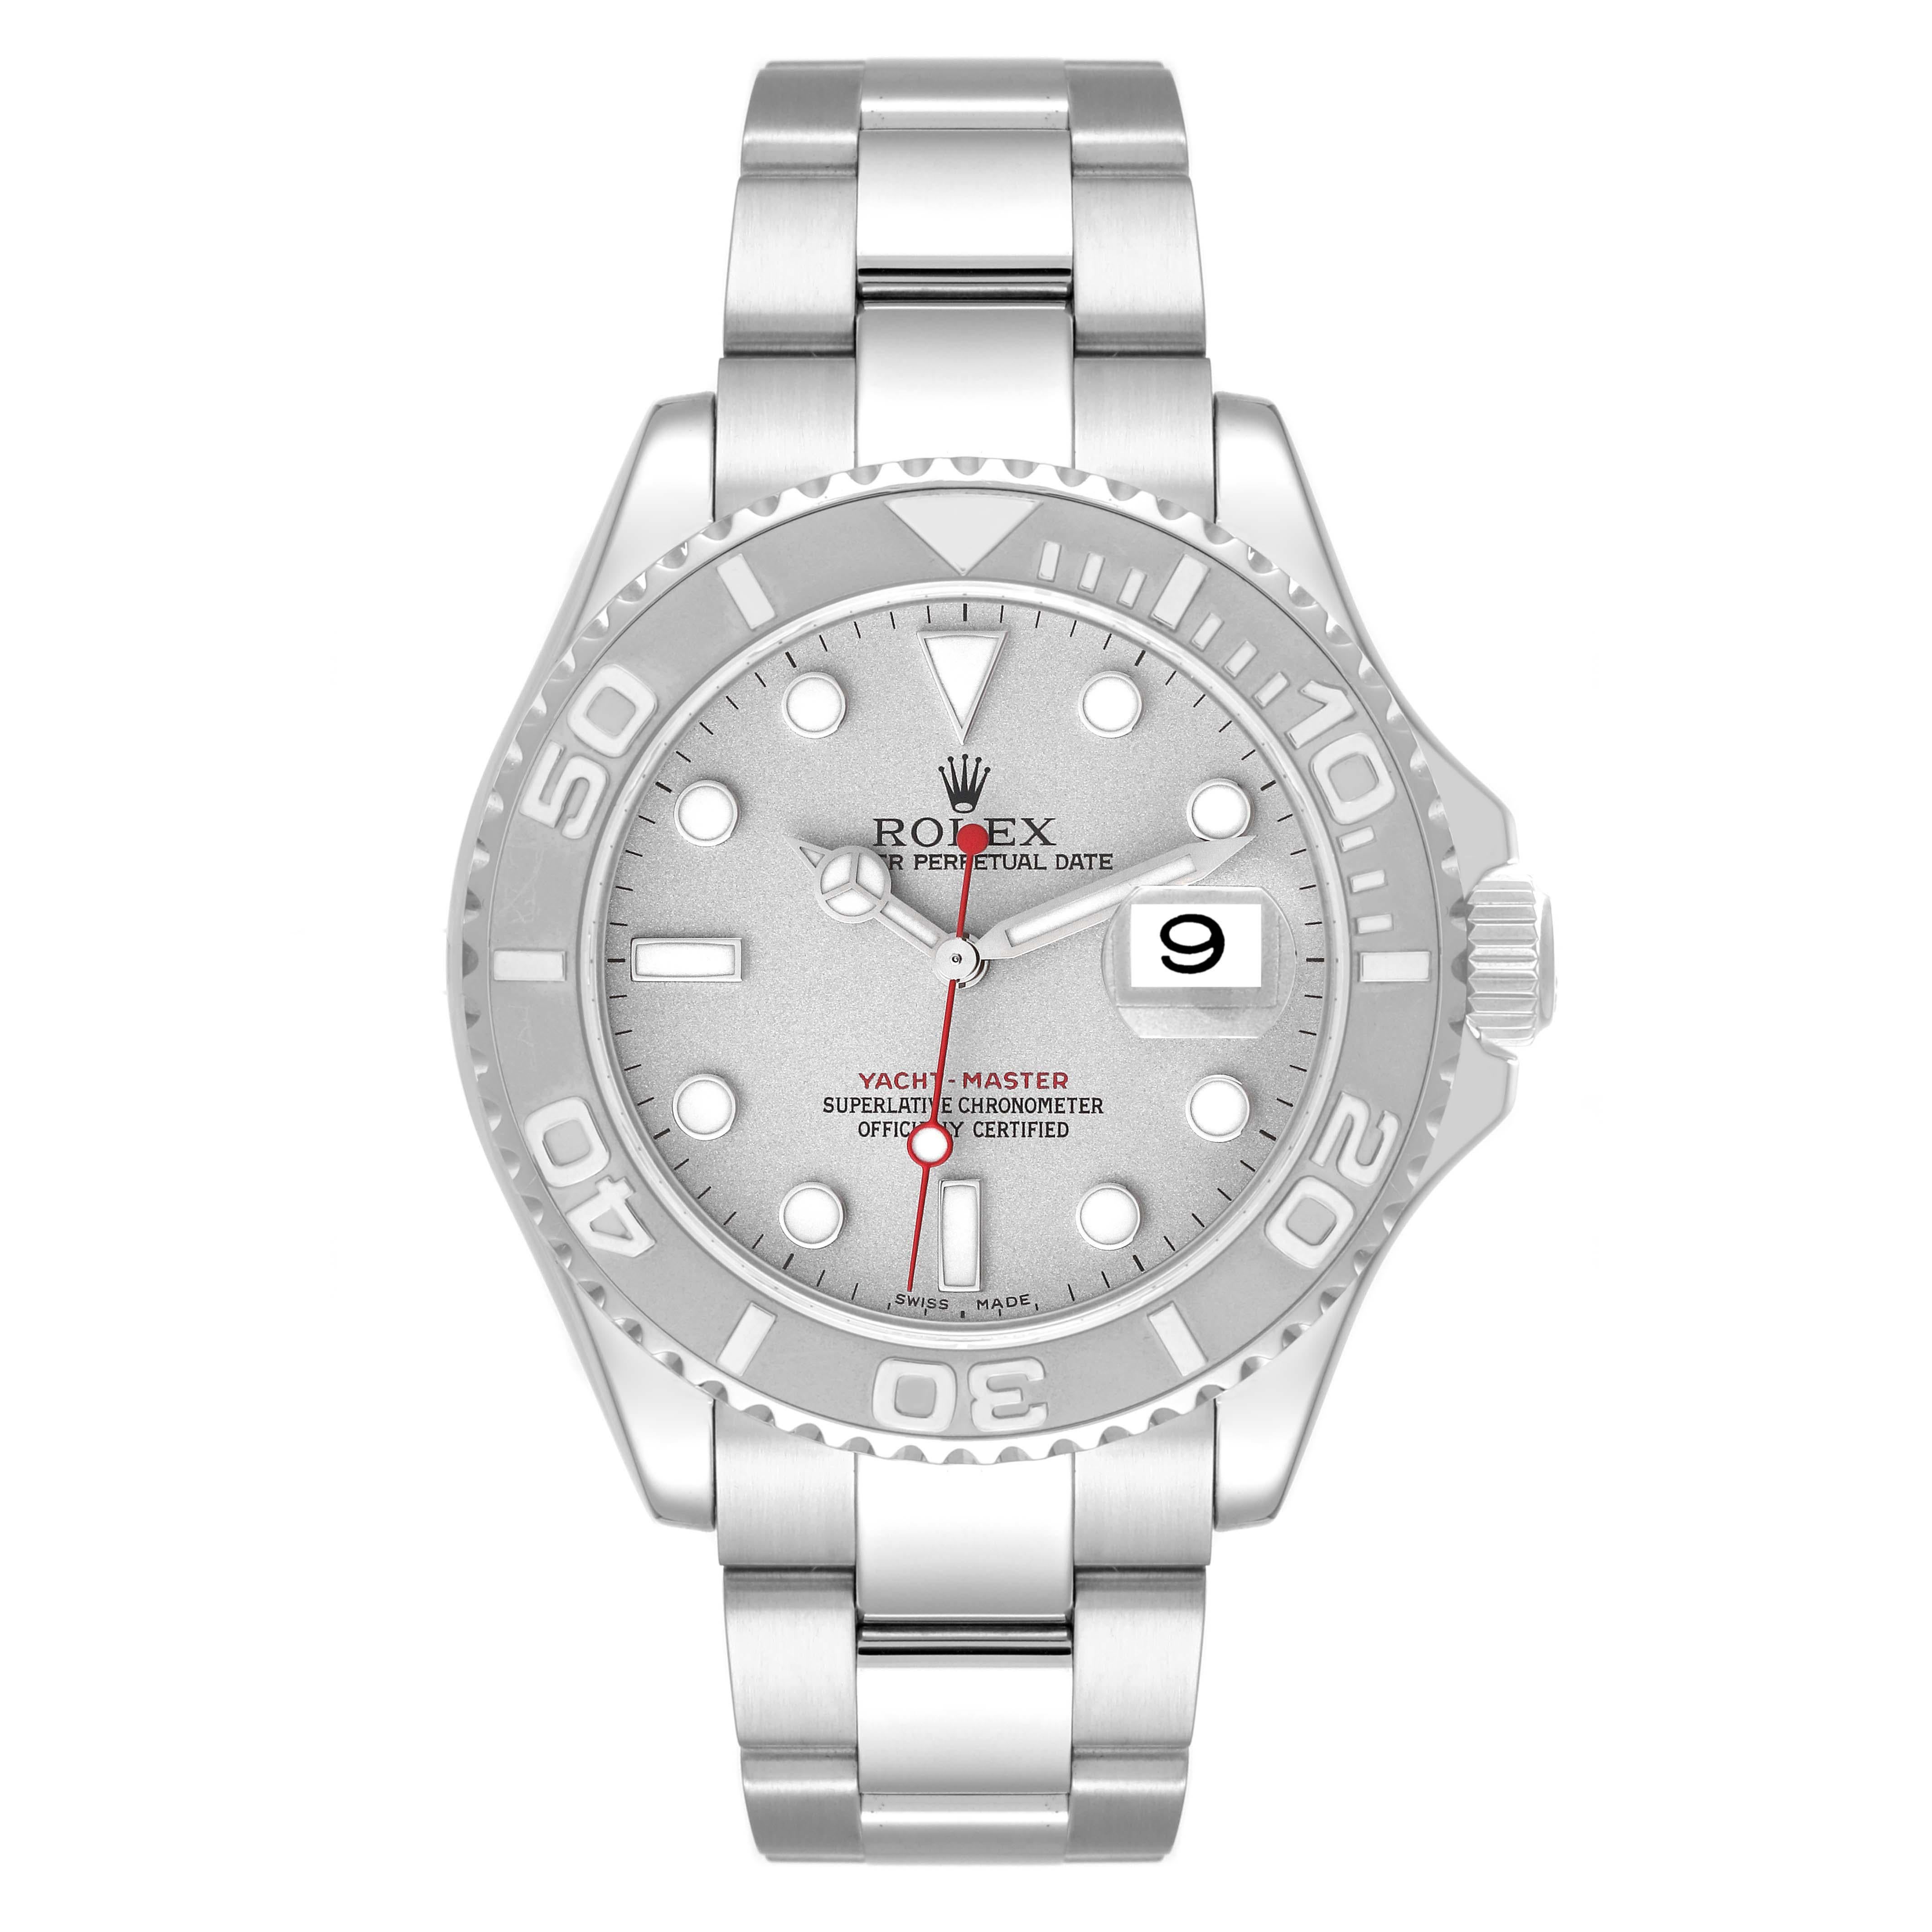 Rolex Yachtmaster Platinum Dial Bezel Steel Mens Watch 16622 Box Papers. Officially certified chronometer automatic self-winding movement. Stainless steel case 40.0 mm in diameter. Rolex logo on the crown. Platinum special time-lapse bidirectional